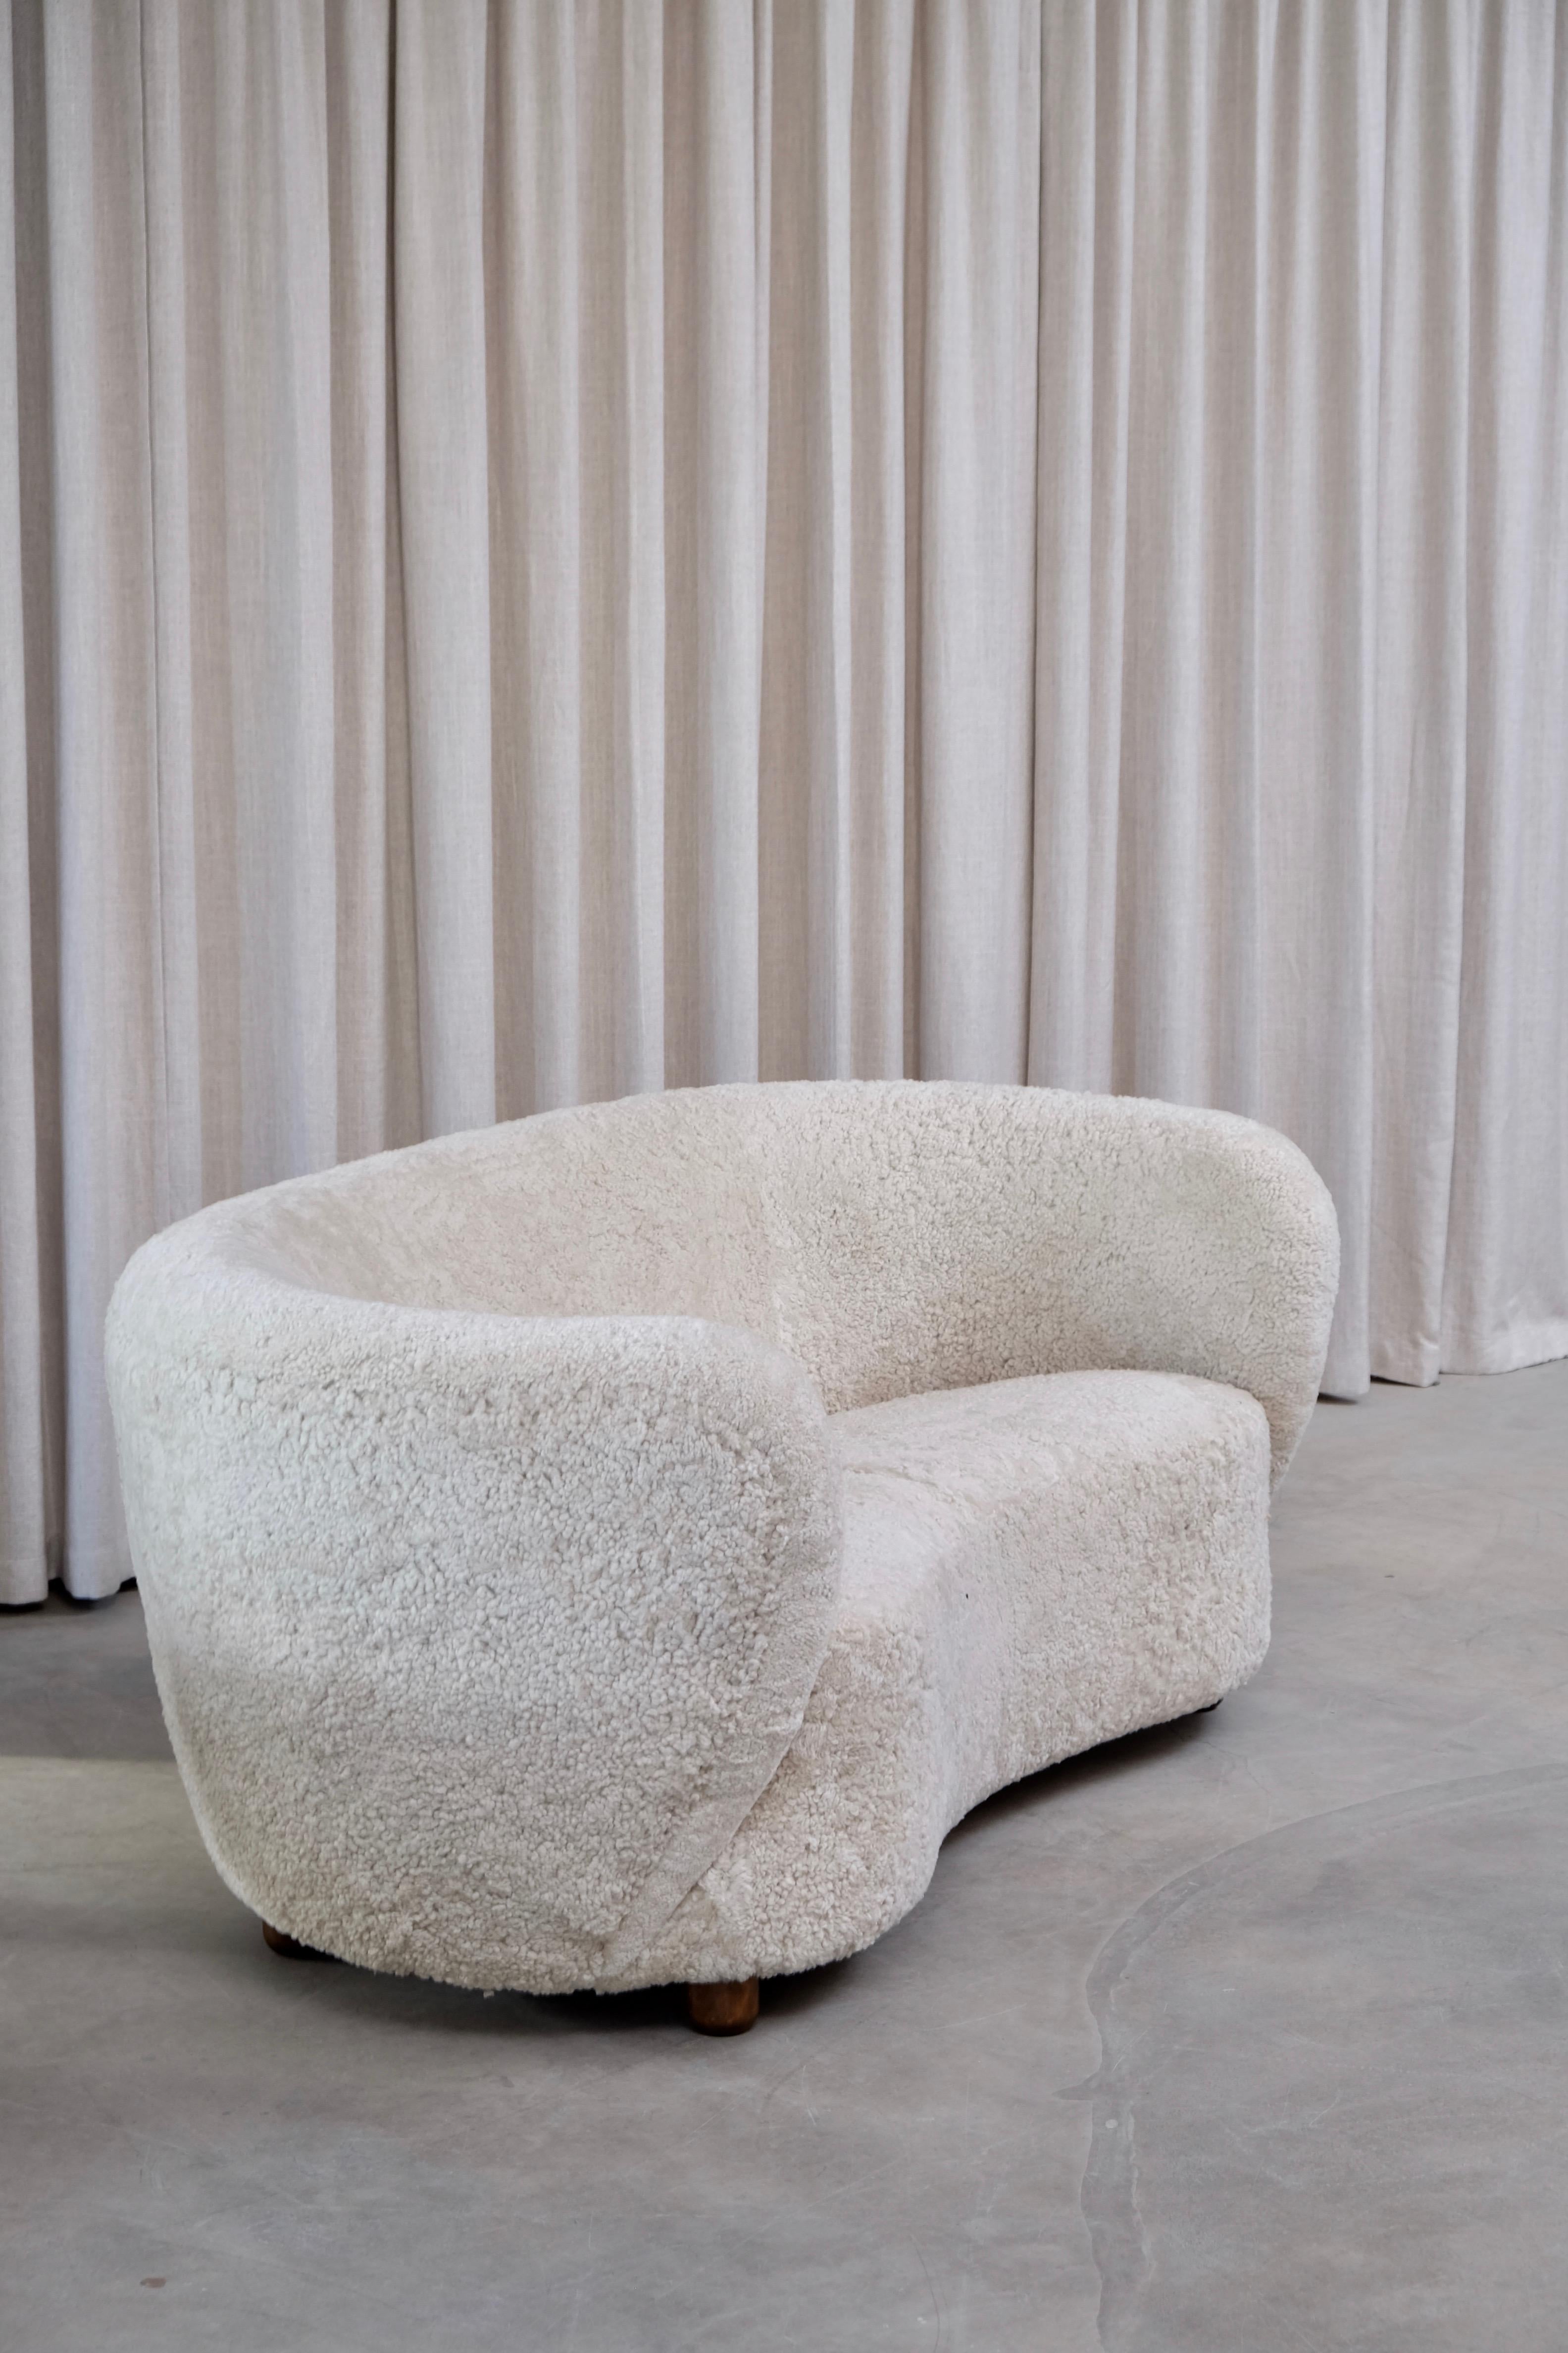 Beautiful sofa produced in Denmark, 1940s, designer unknown.
Professionally reupholstered in high quality sheepskin from Skandilock.
Global front door shipping, delivery within 14-21 days: €800

In the style of ours polaire/polar bear sofa after